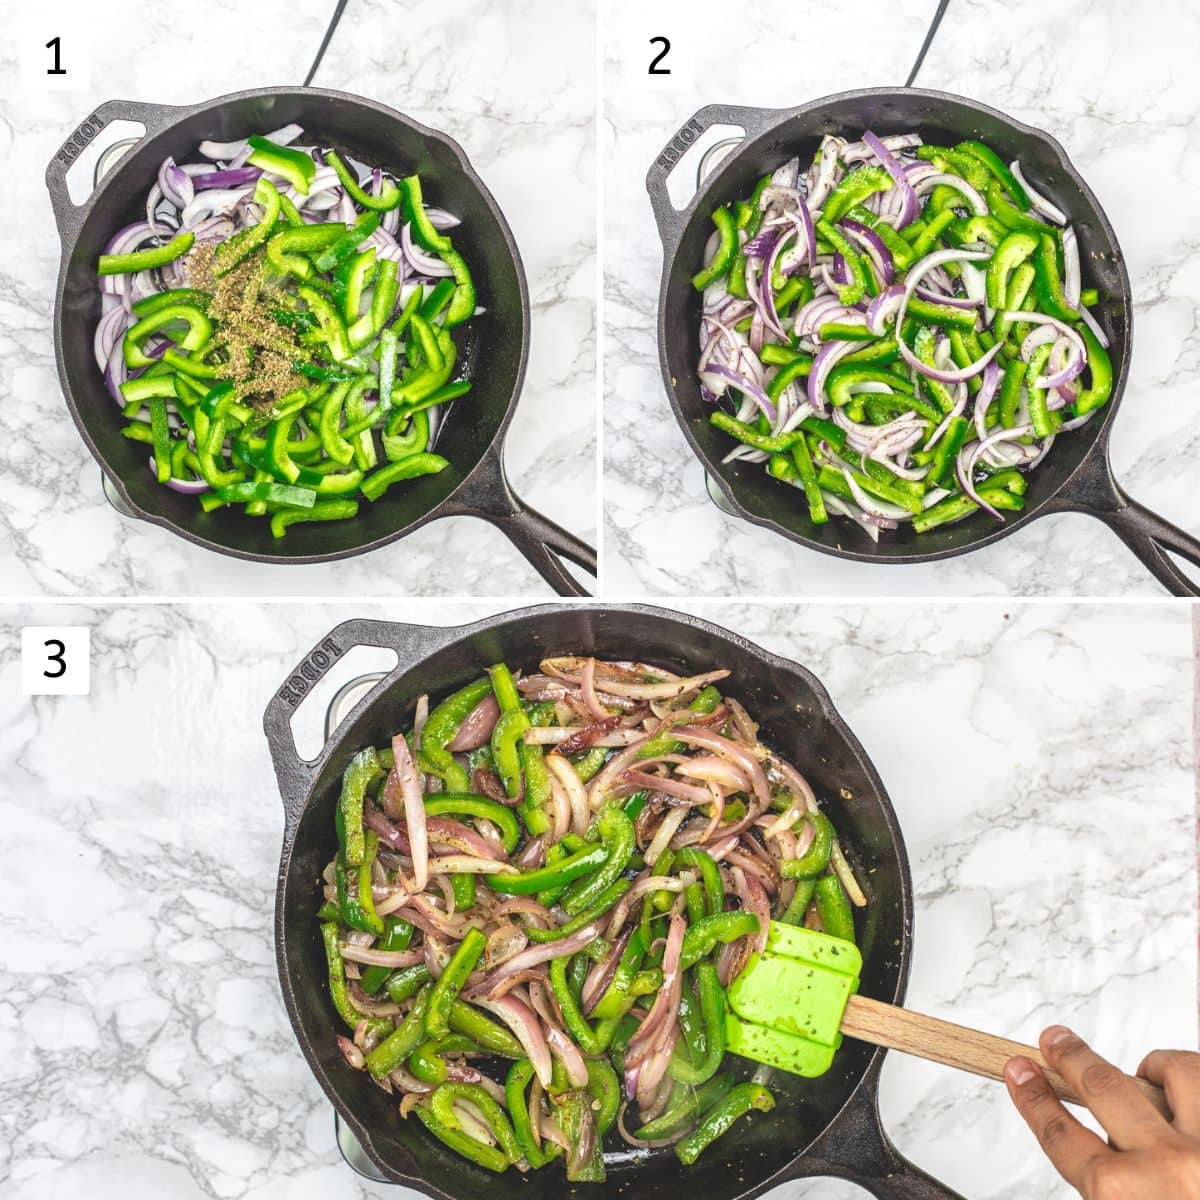 Collage of 3 images showing cooking onions and peppers in a cast iron pan.